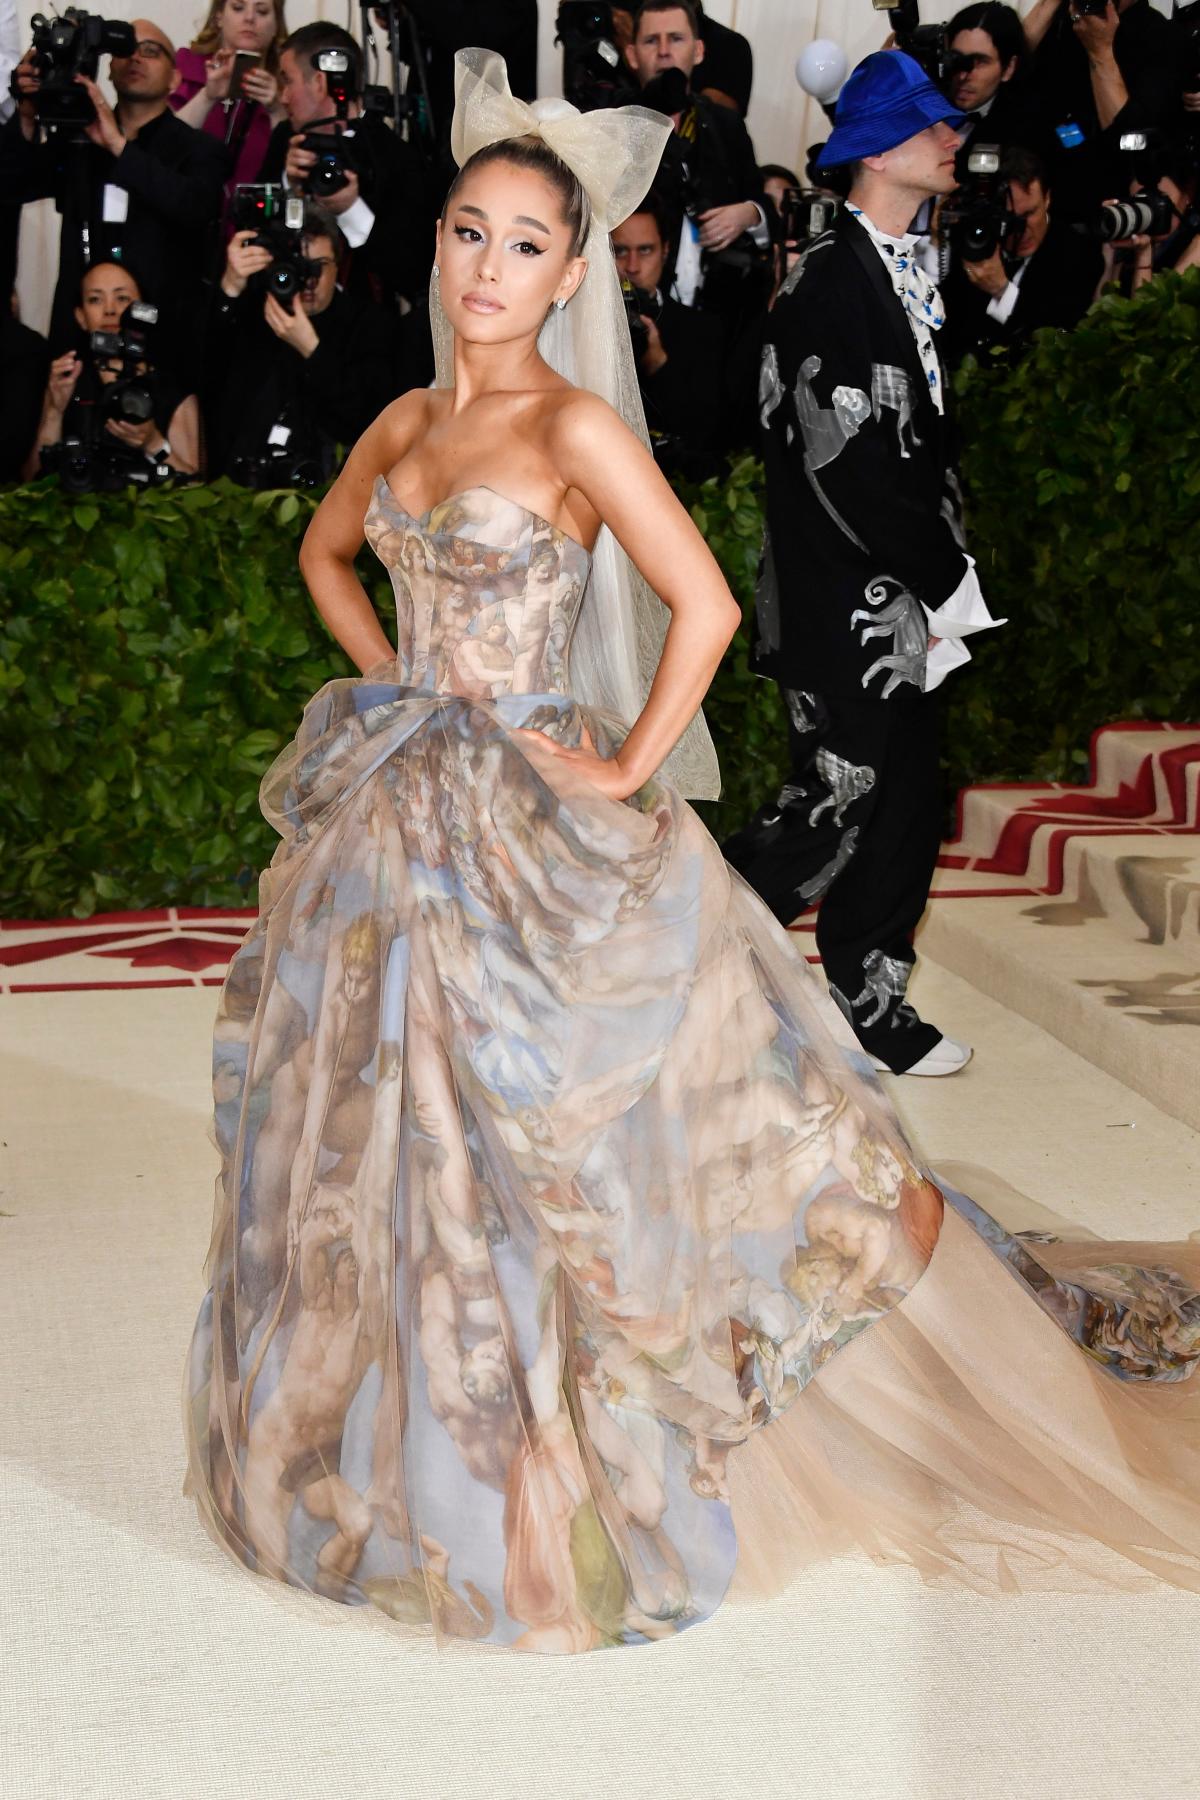 Ariana Grande's Most Daring Looks on Stage and on the Red Carpet